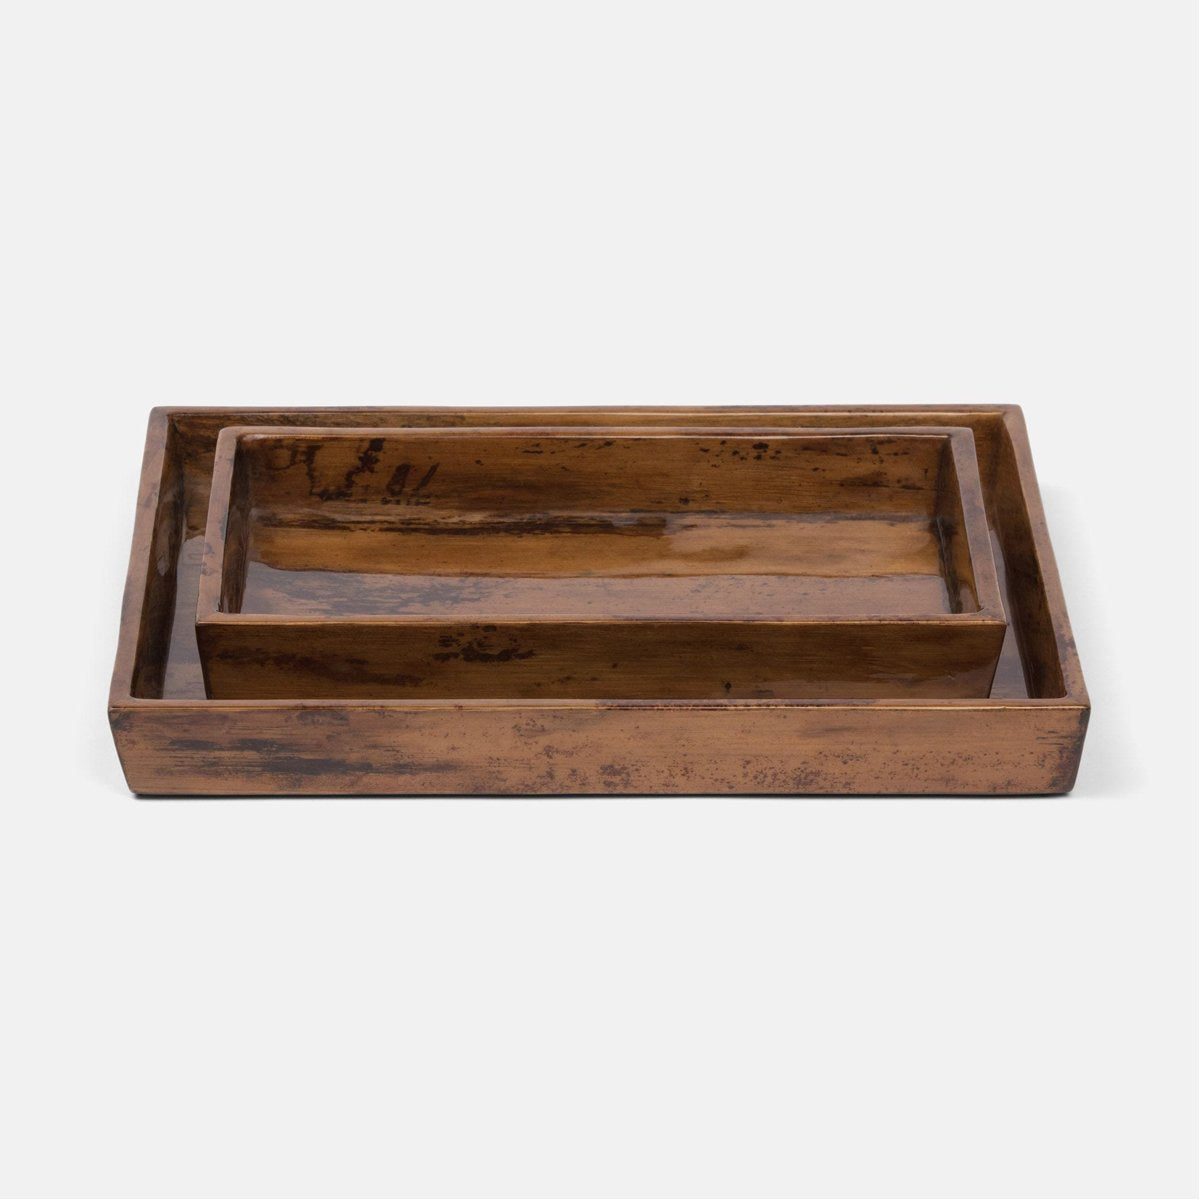 Pigeon and Poodle Varadero Rectangular Tray - Tapered, 2-Piece Set